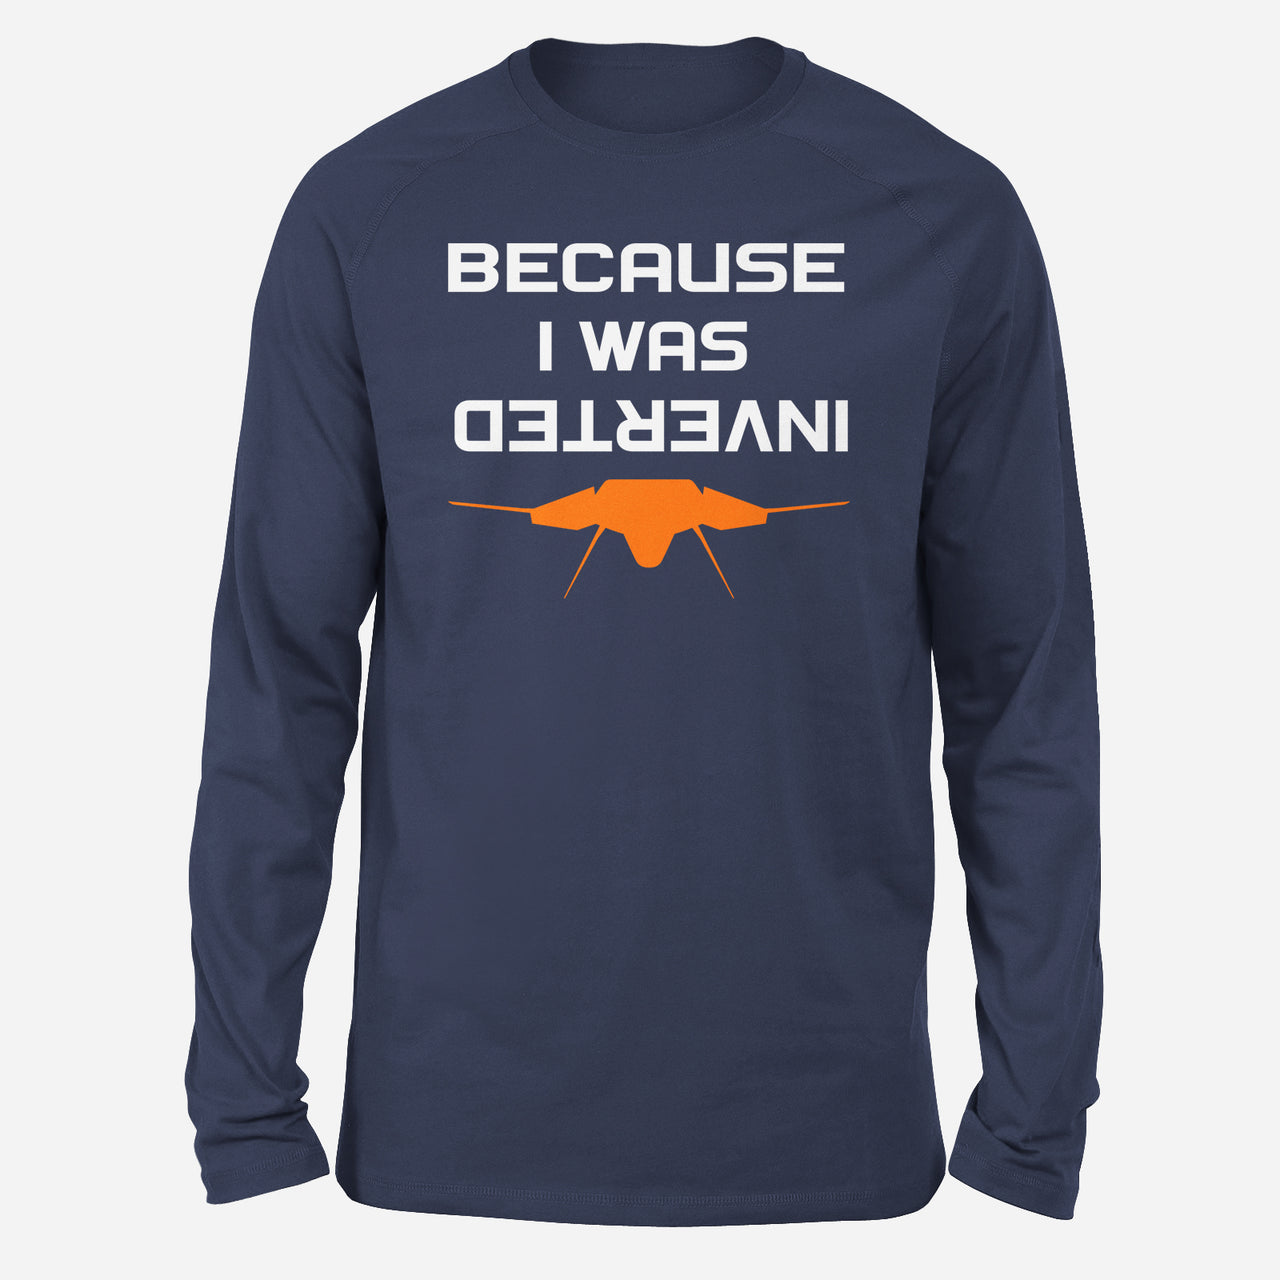 Because I was Inverted Designed Long-Sleeve T-Shirts